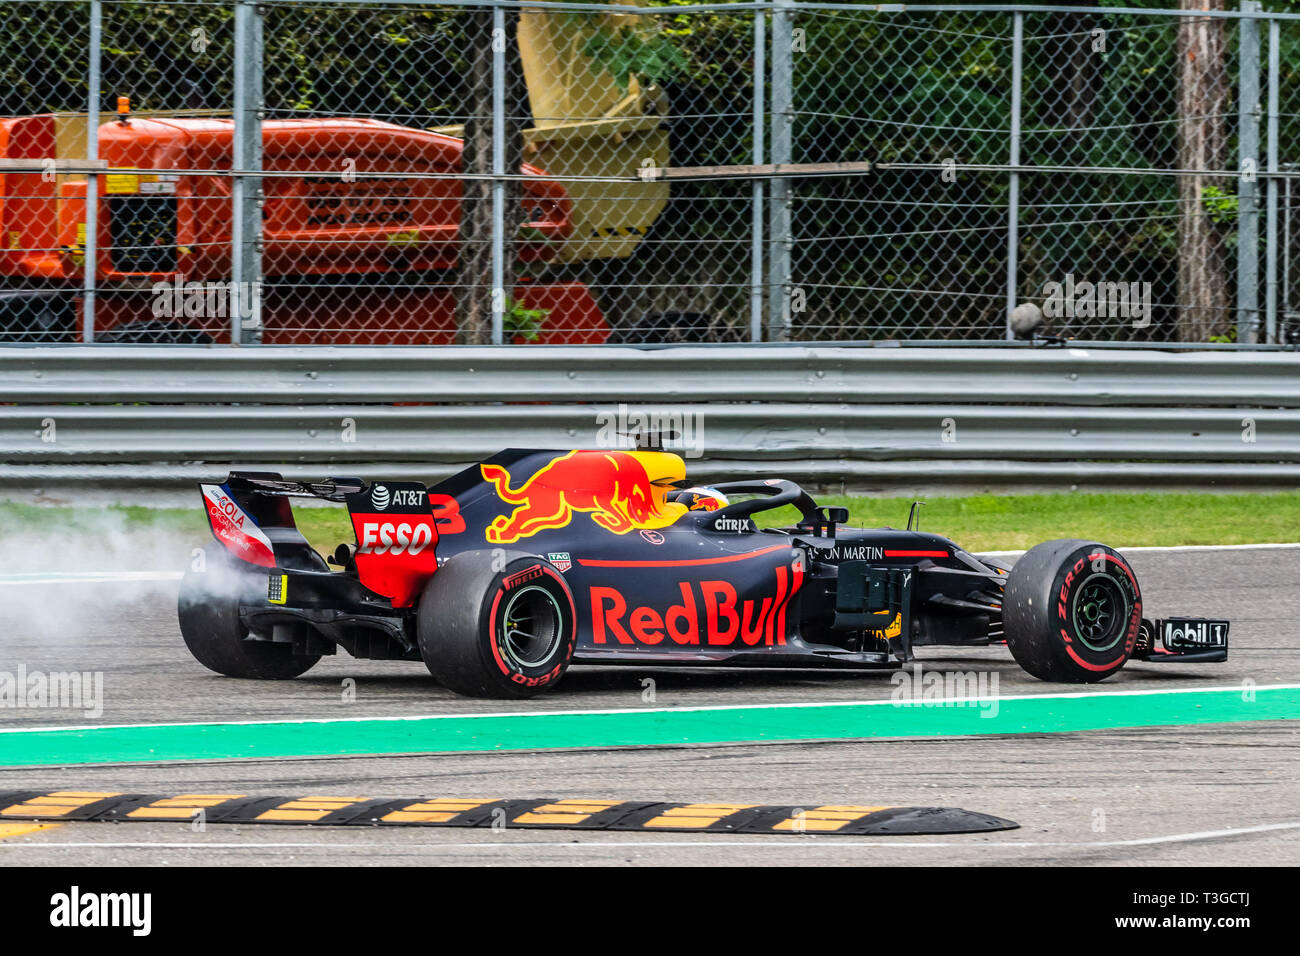 Monza/Italy - the Renault engine in #3 Daniel Ricciardo's Red Bull blows up during the Italian GP Stock Photo